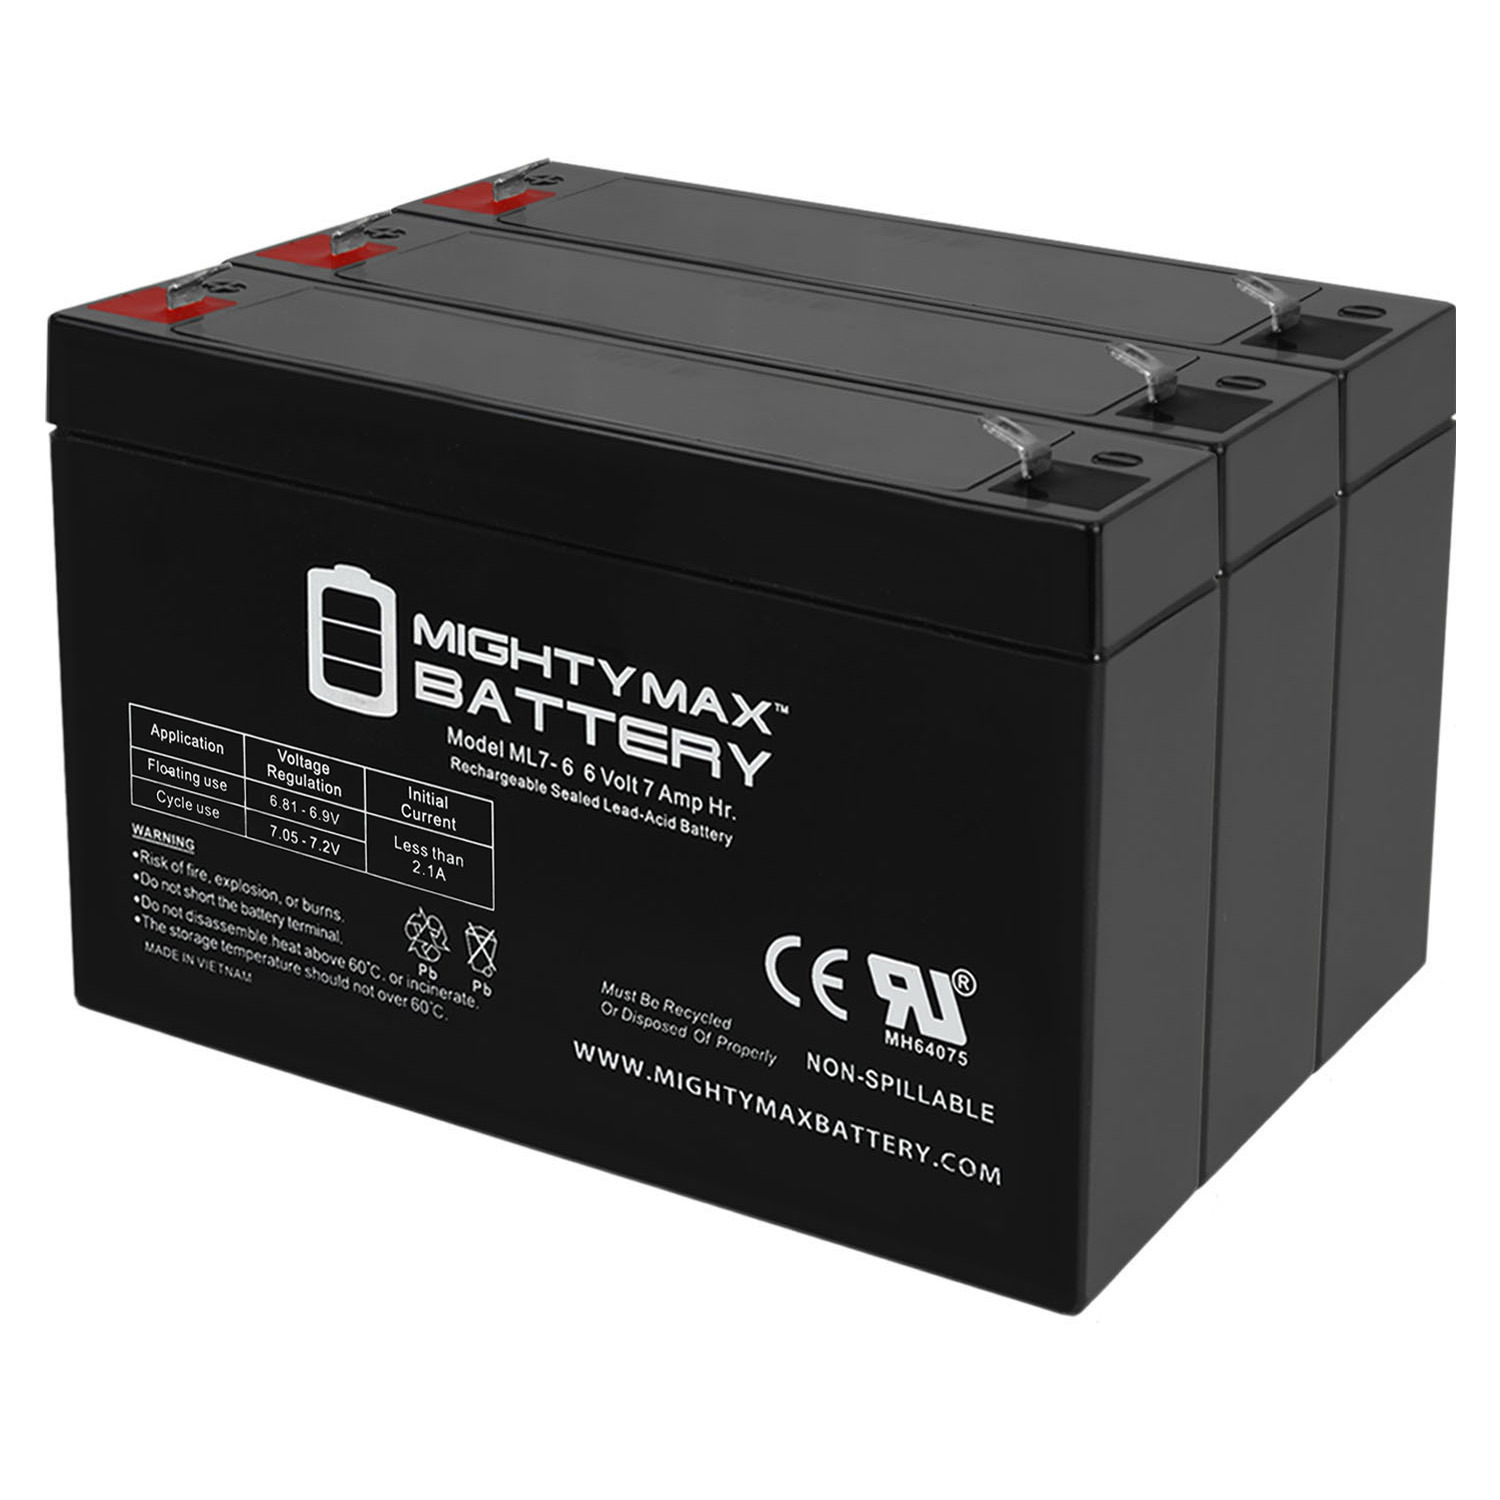 6V 7Ah SLA Replacement Battery for Sonnenschein A206 6.5 S - 3 Pack